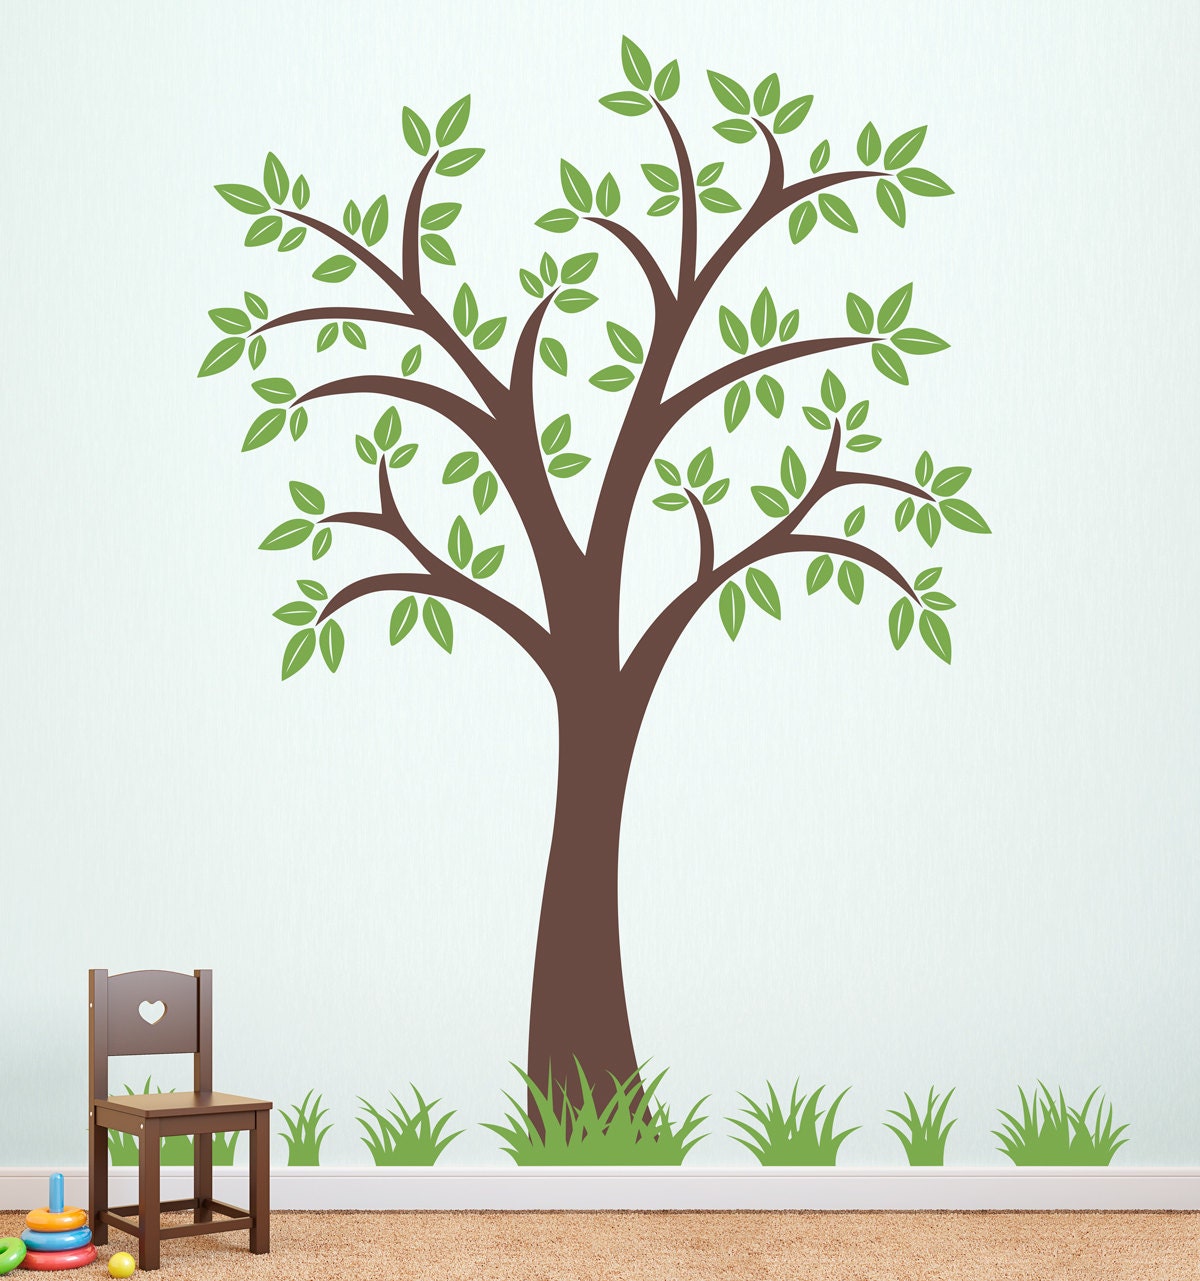 Tree Wall Decal with Grass - 80 inch Tree - Tree Decal Set - Grass Wall Stickers